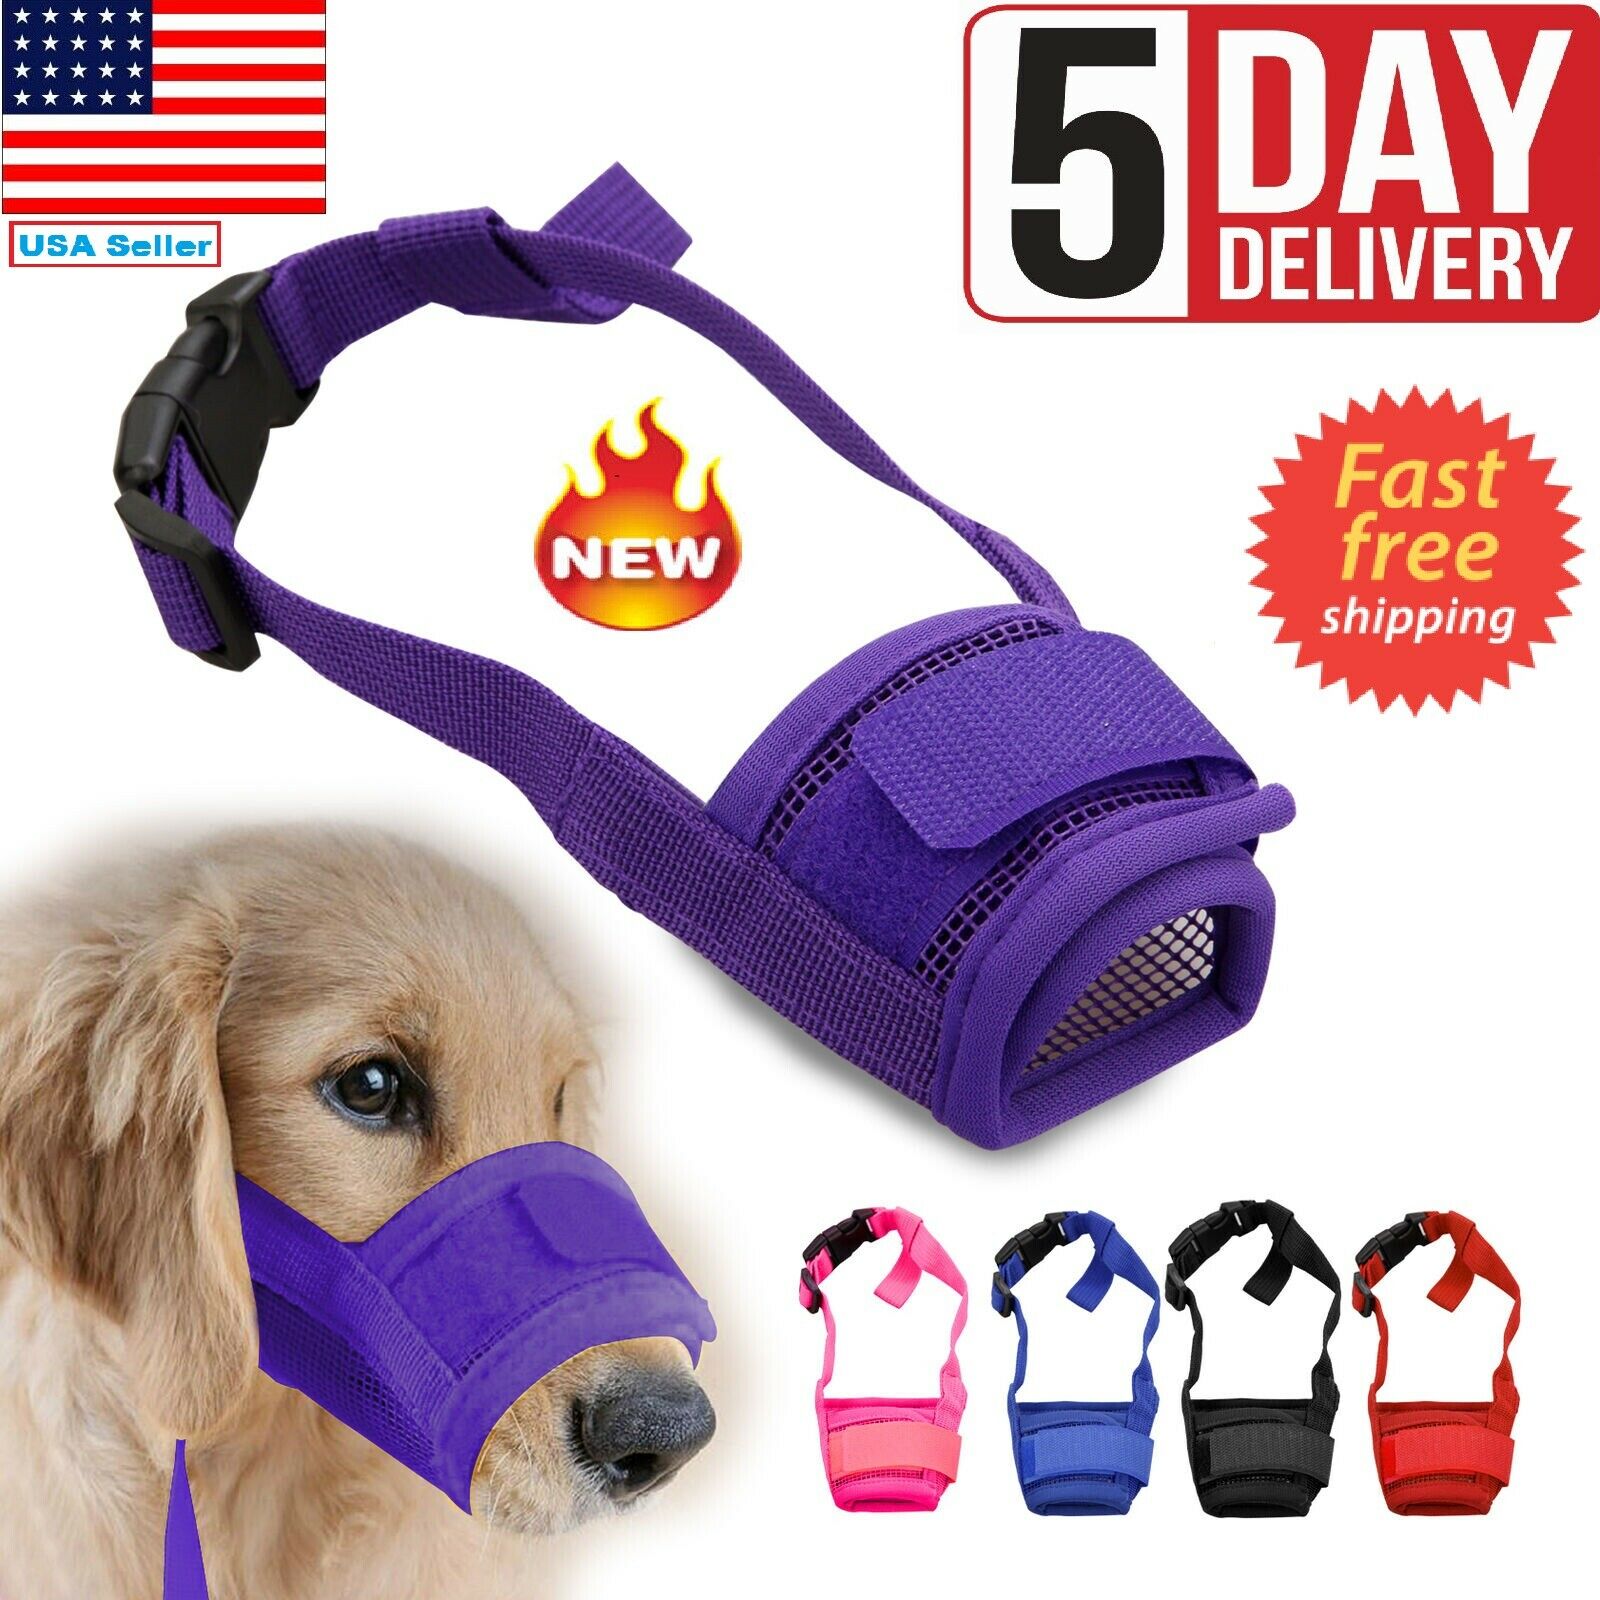 Adjustable Pet Dog Mask Small&large Mouth Muzzle Grooming Anti Stop Bark Bite